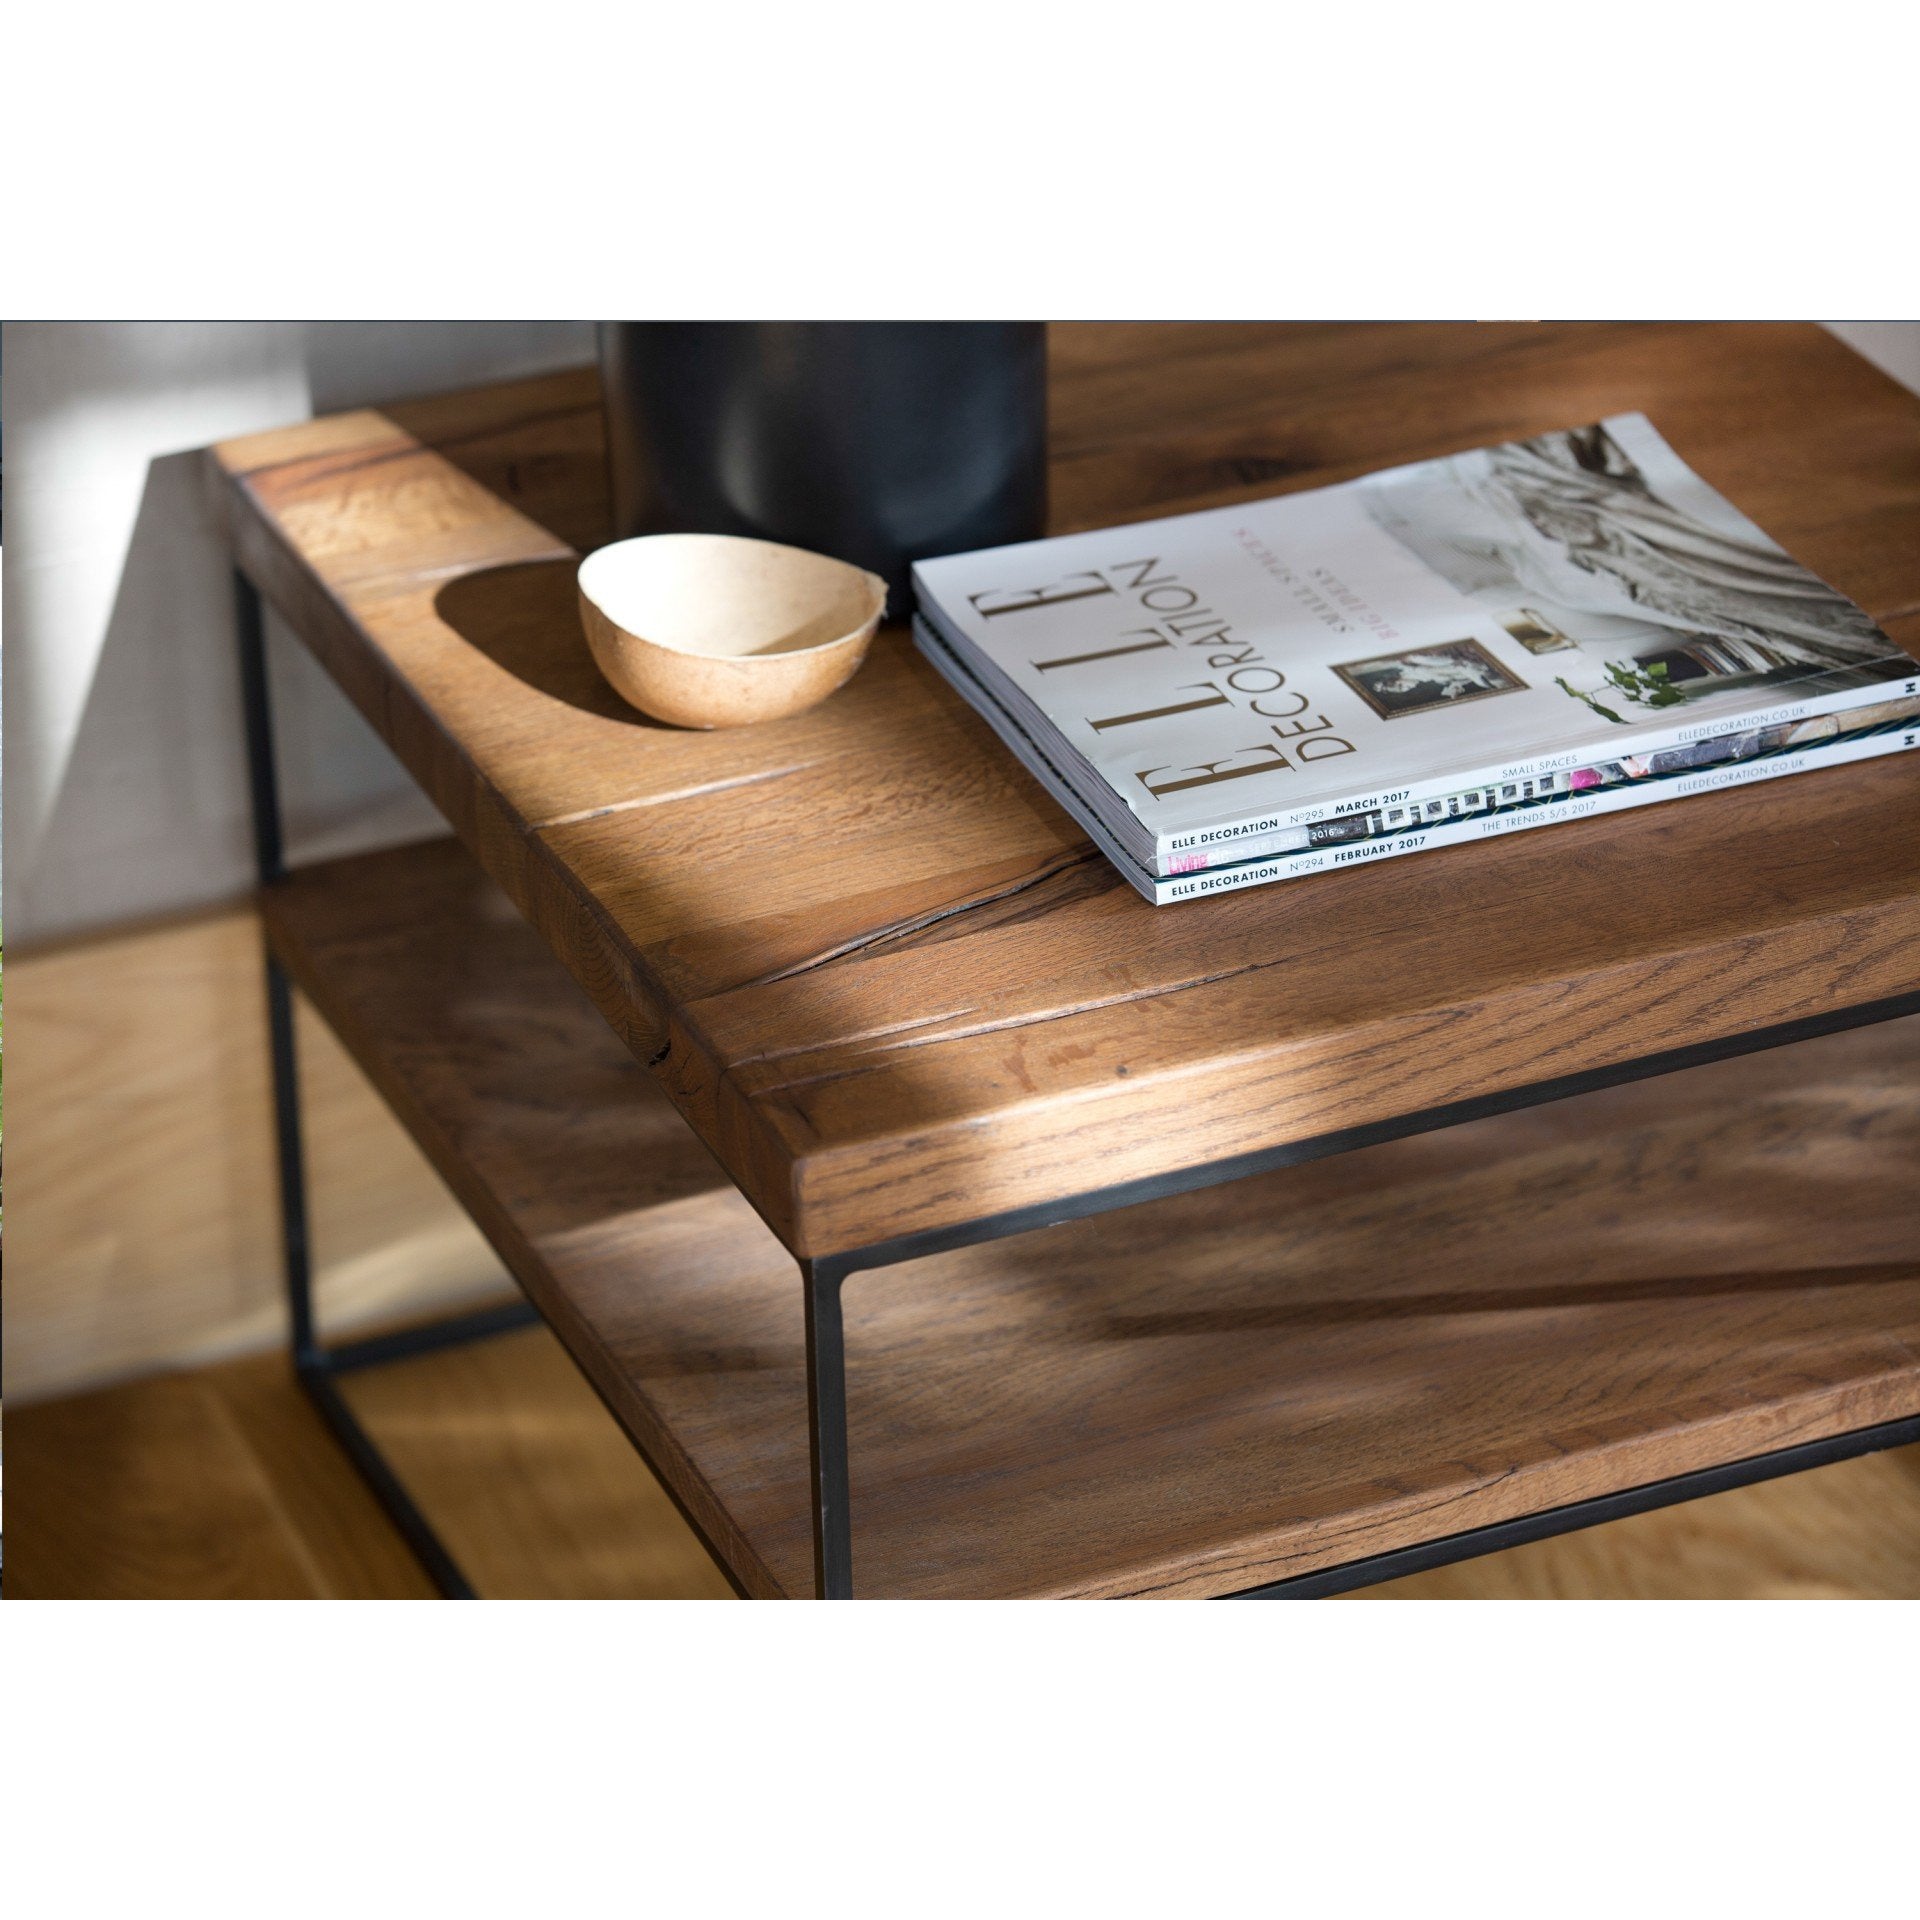 Soho Coffee Table from Upstairs Downstairs Furniture in Lisburn, Monaghan and Enniskillen